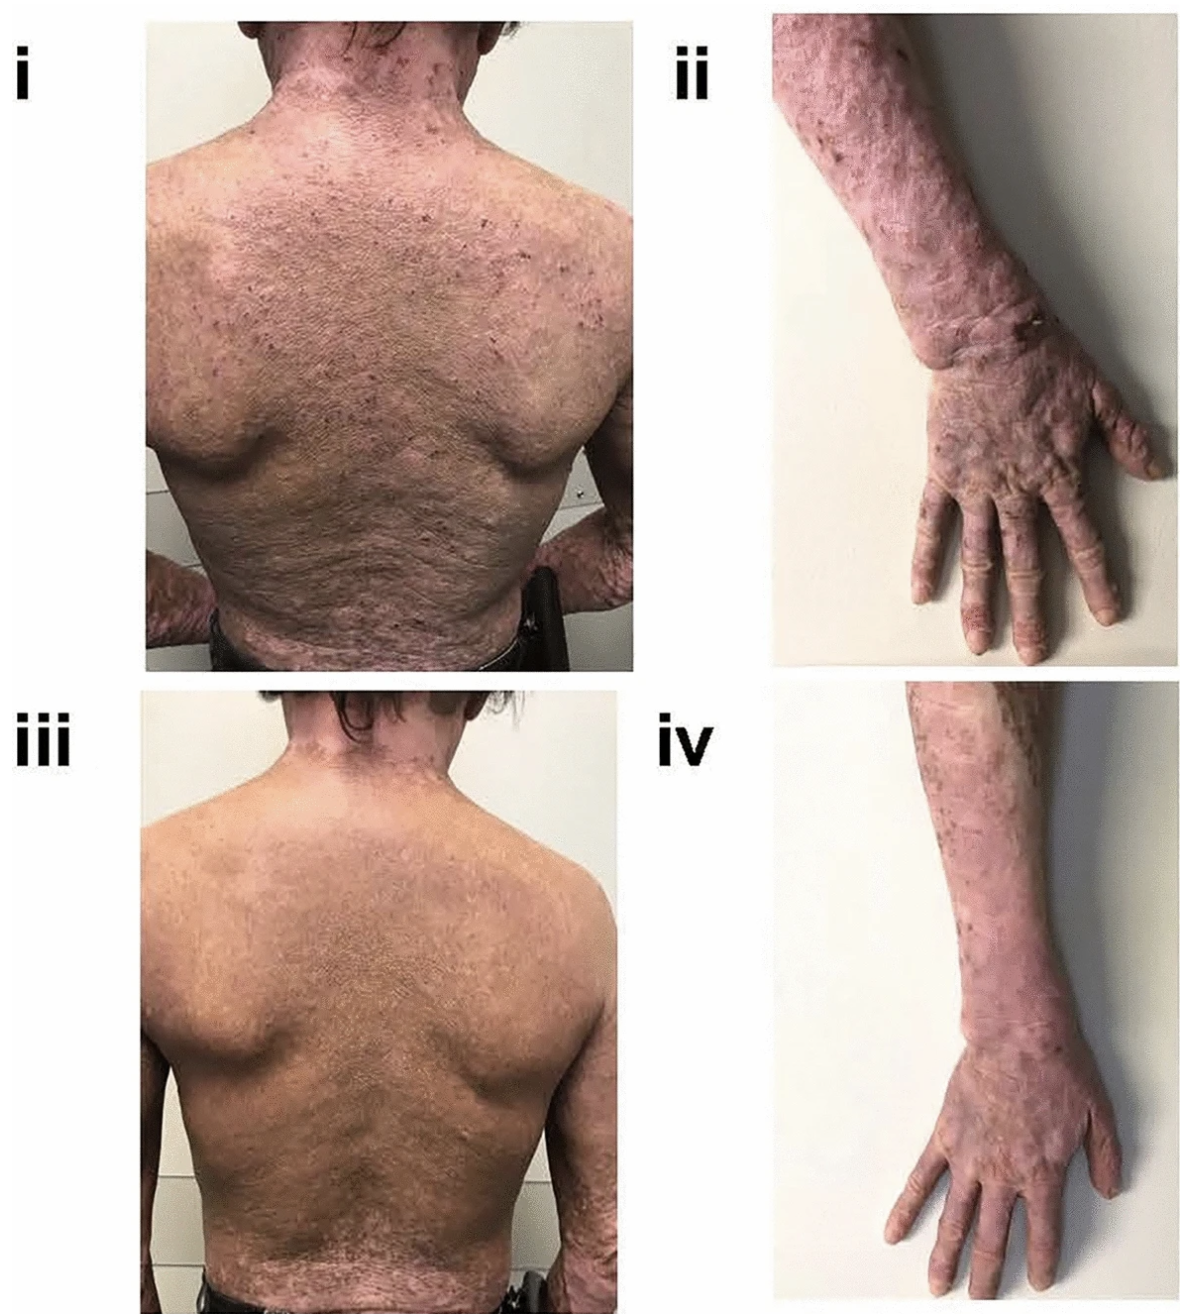 When Creams and Ointment Aren’t Cutting It: Dupilumab For Atopic Dermatitis